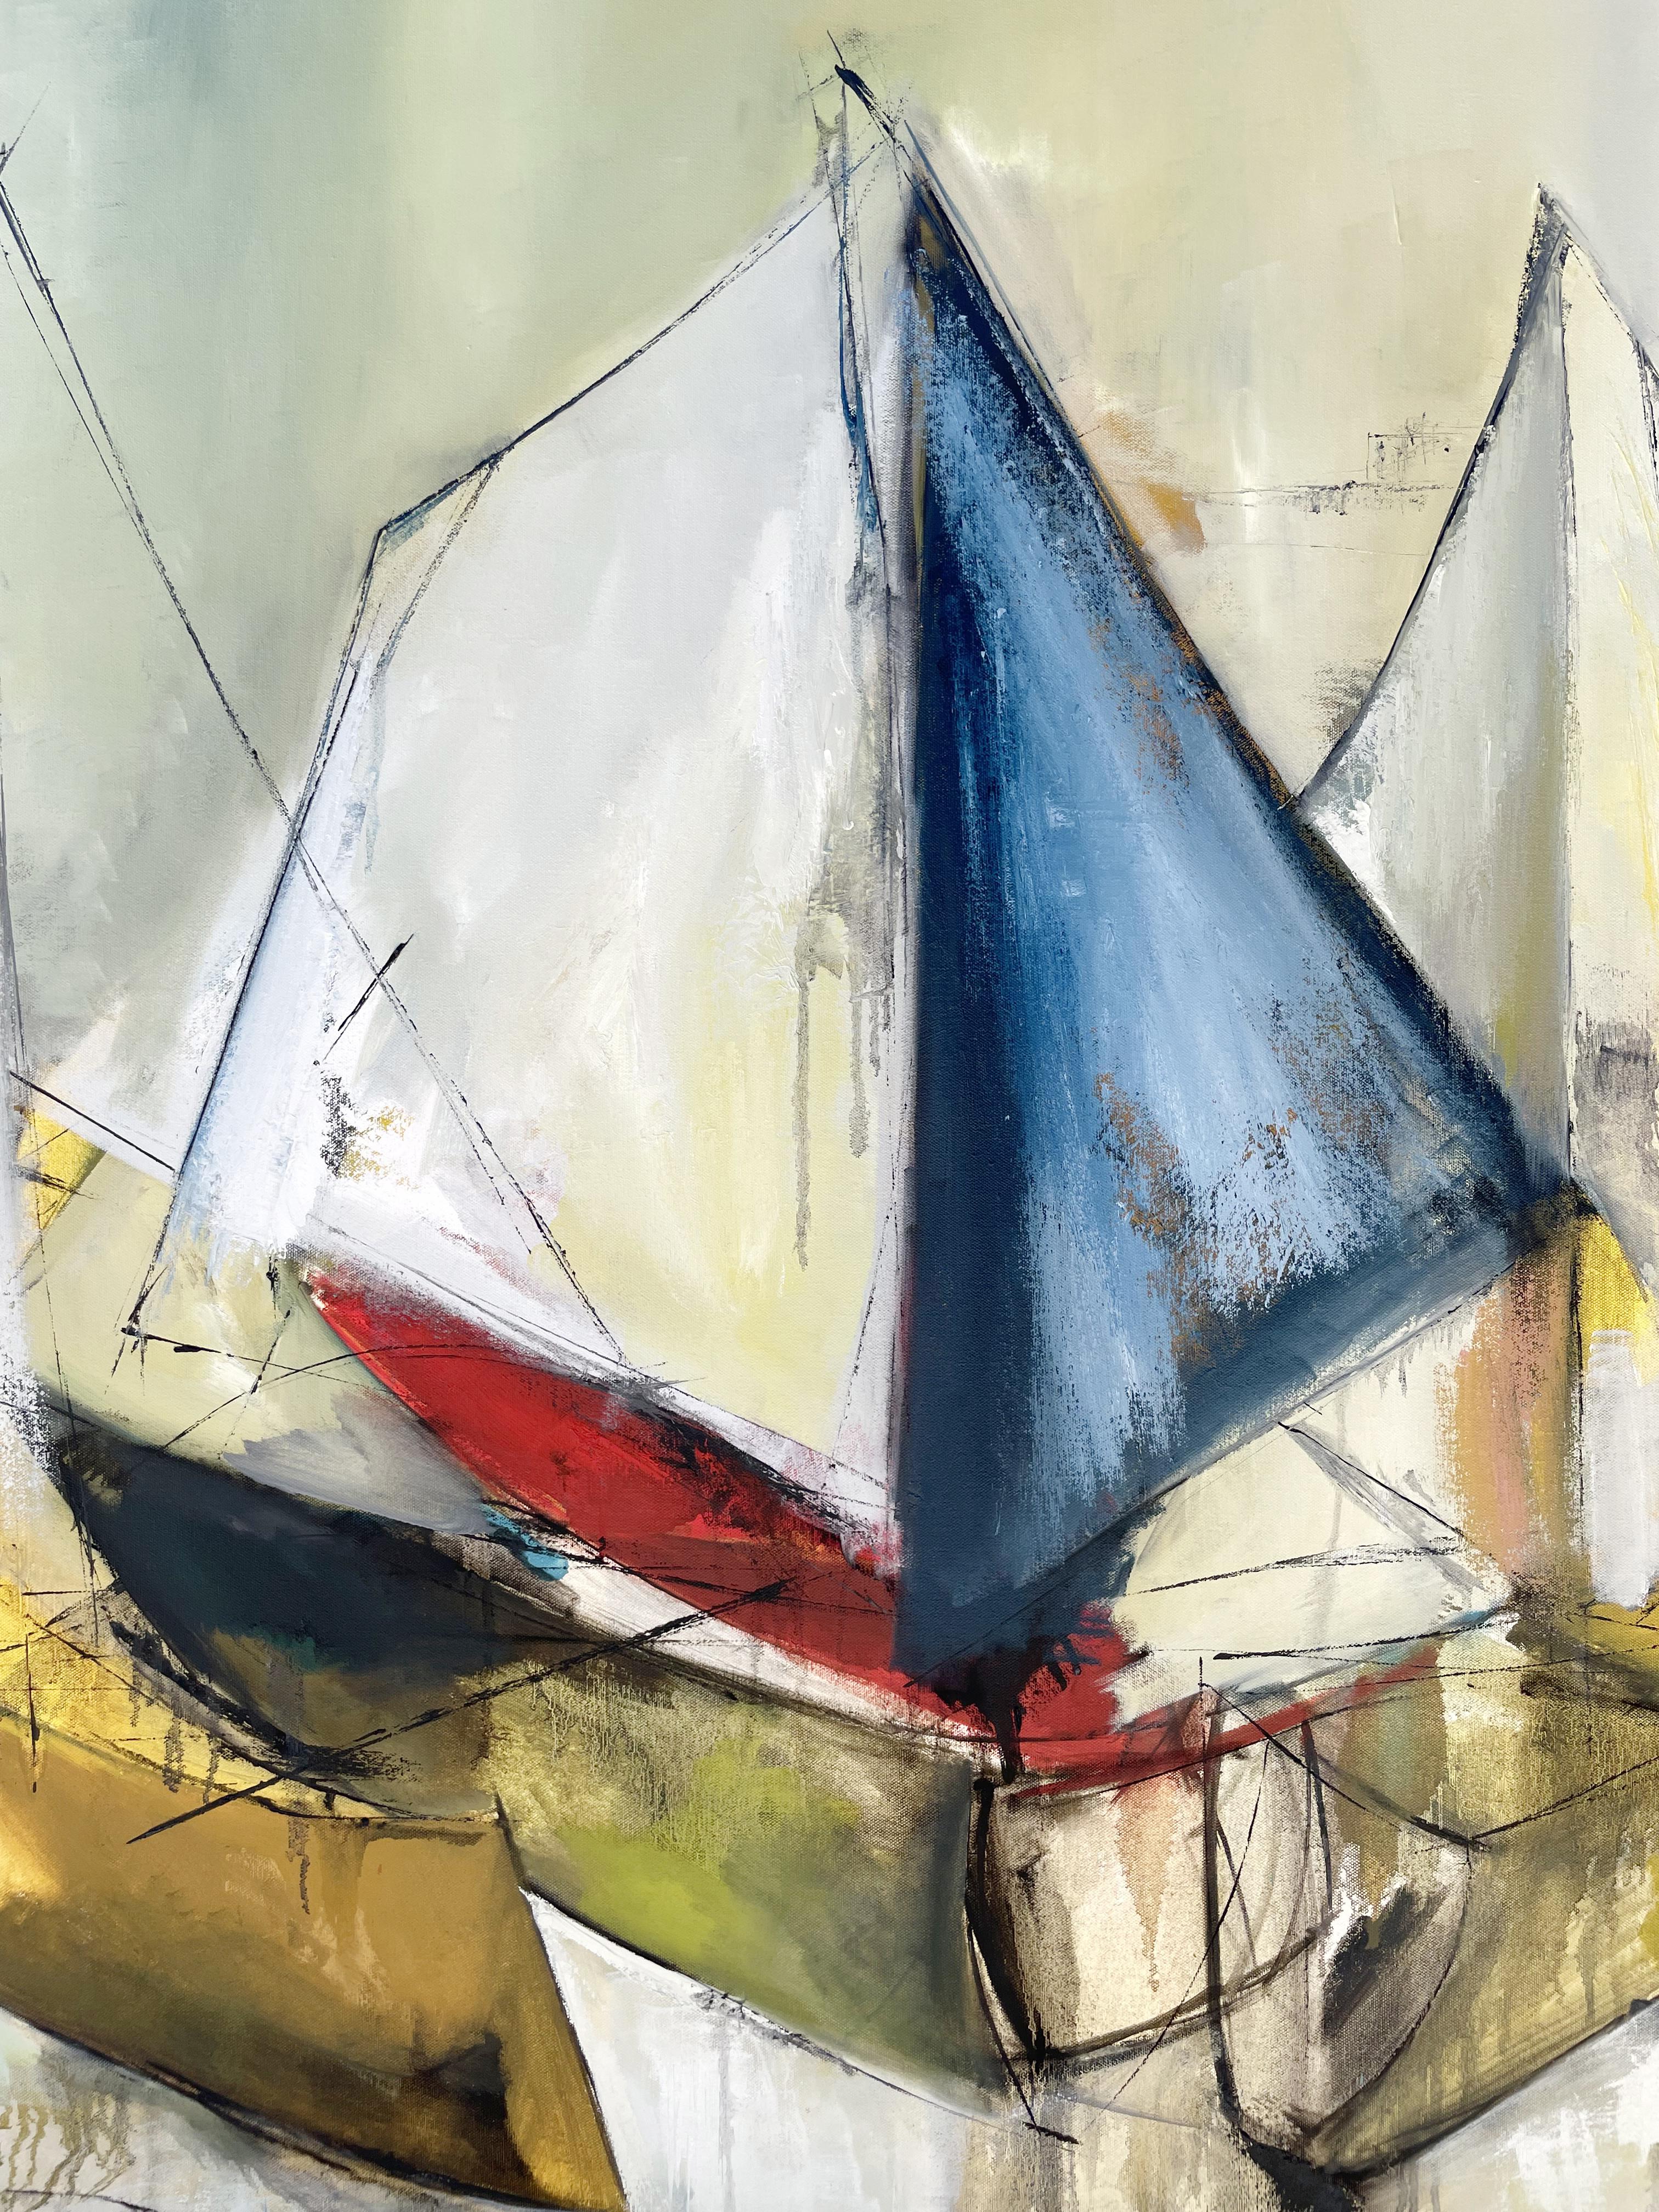 'Voiliers' (Sailboats), oil on canvas. Artist signed lower right and certificate of authenticity is available. 

Voiliers, French for Sailboats, is a scenic depiction of abstract sailboats setting sail off a near by coastal town.  These boats have